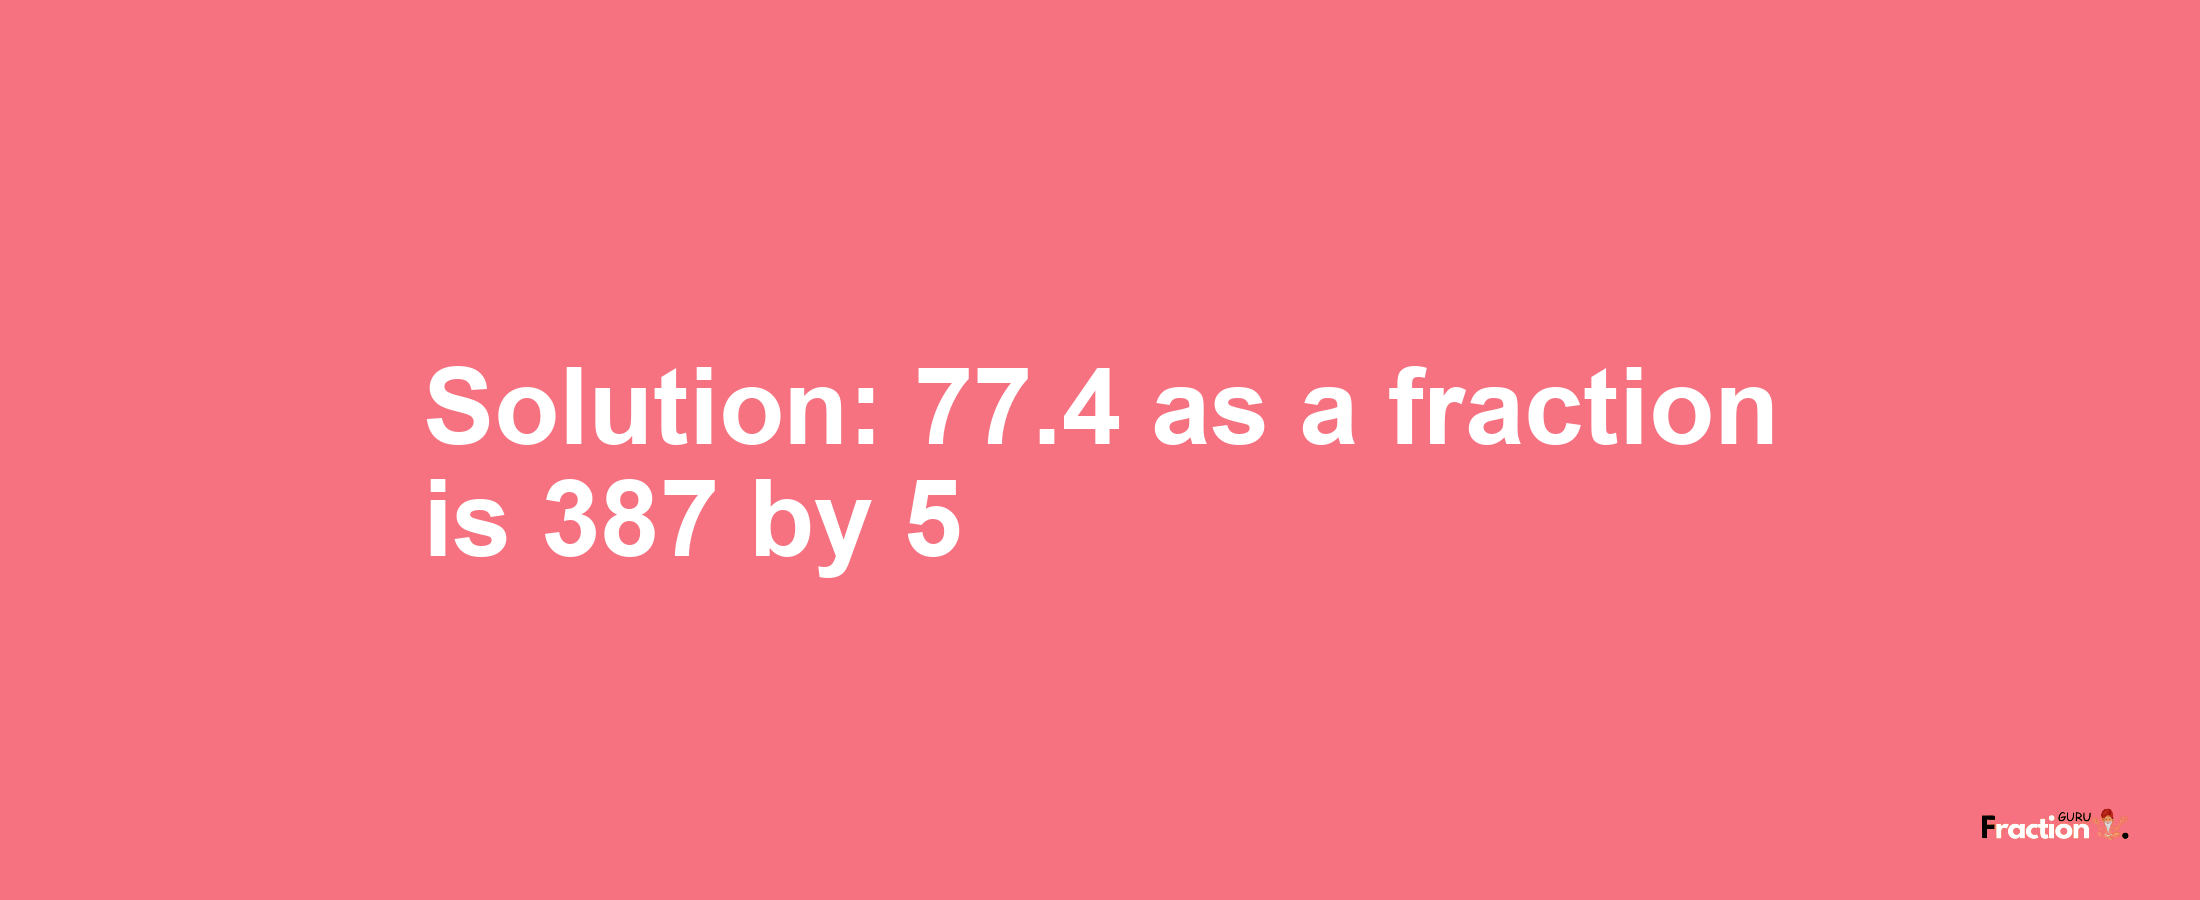 Solution:77.4 as a fraction is 387/5